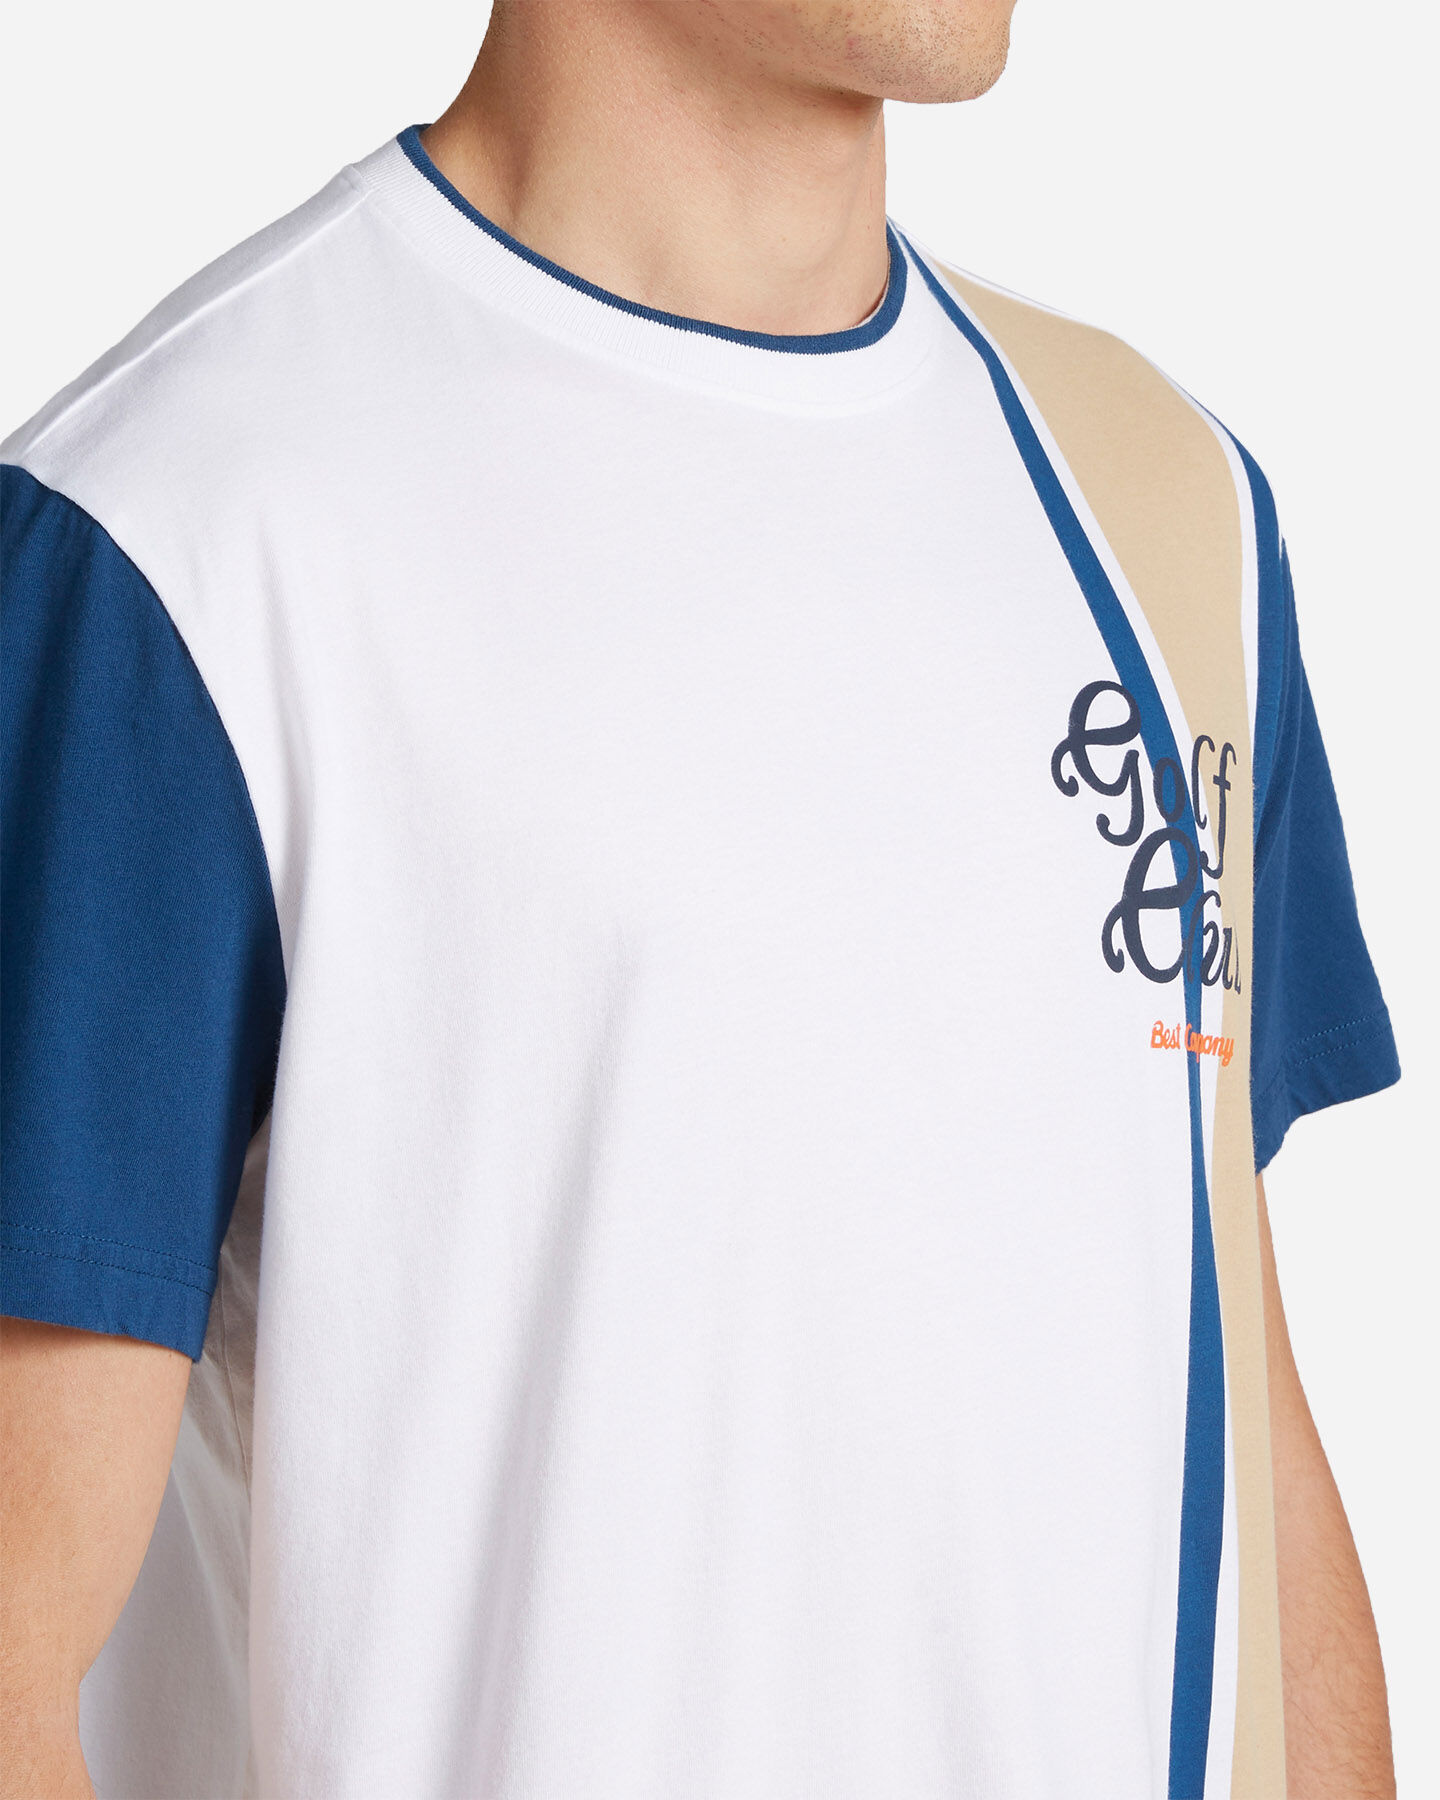  T-Shirt BEST COMPANY GOLF CLUB M S4122340|1040|S scatto 4